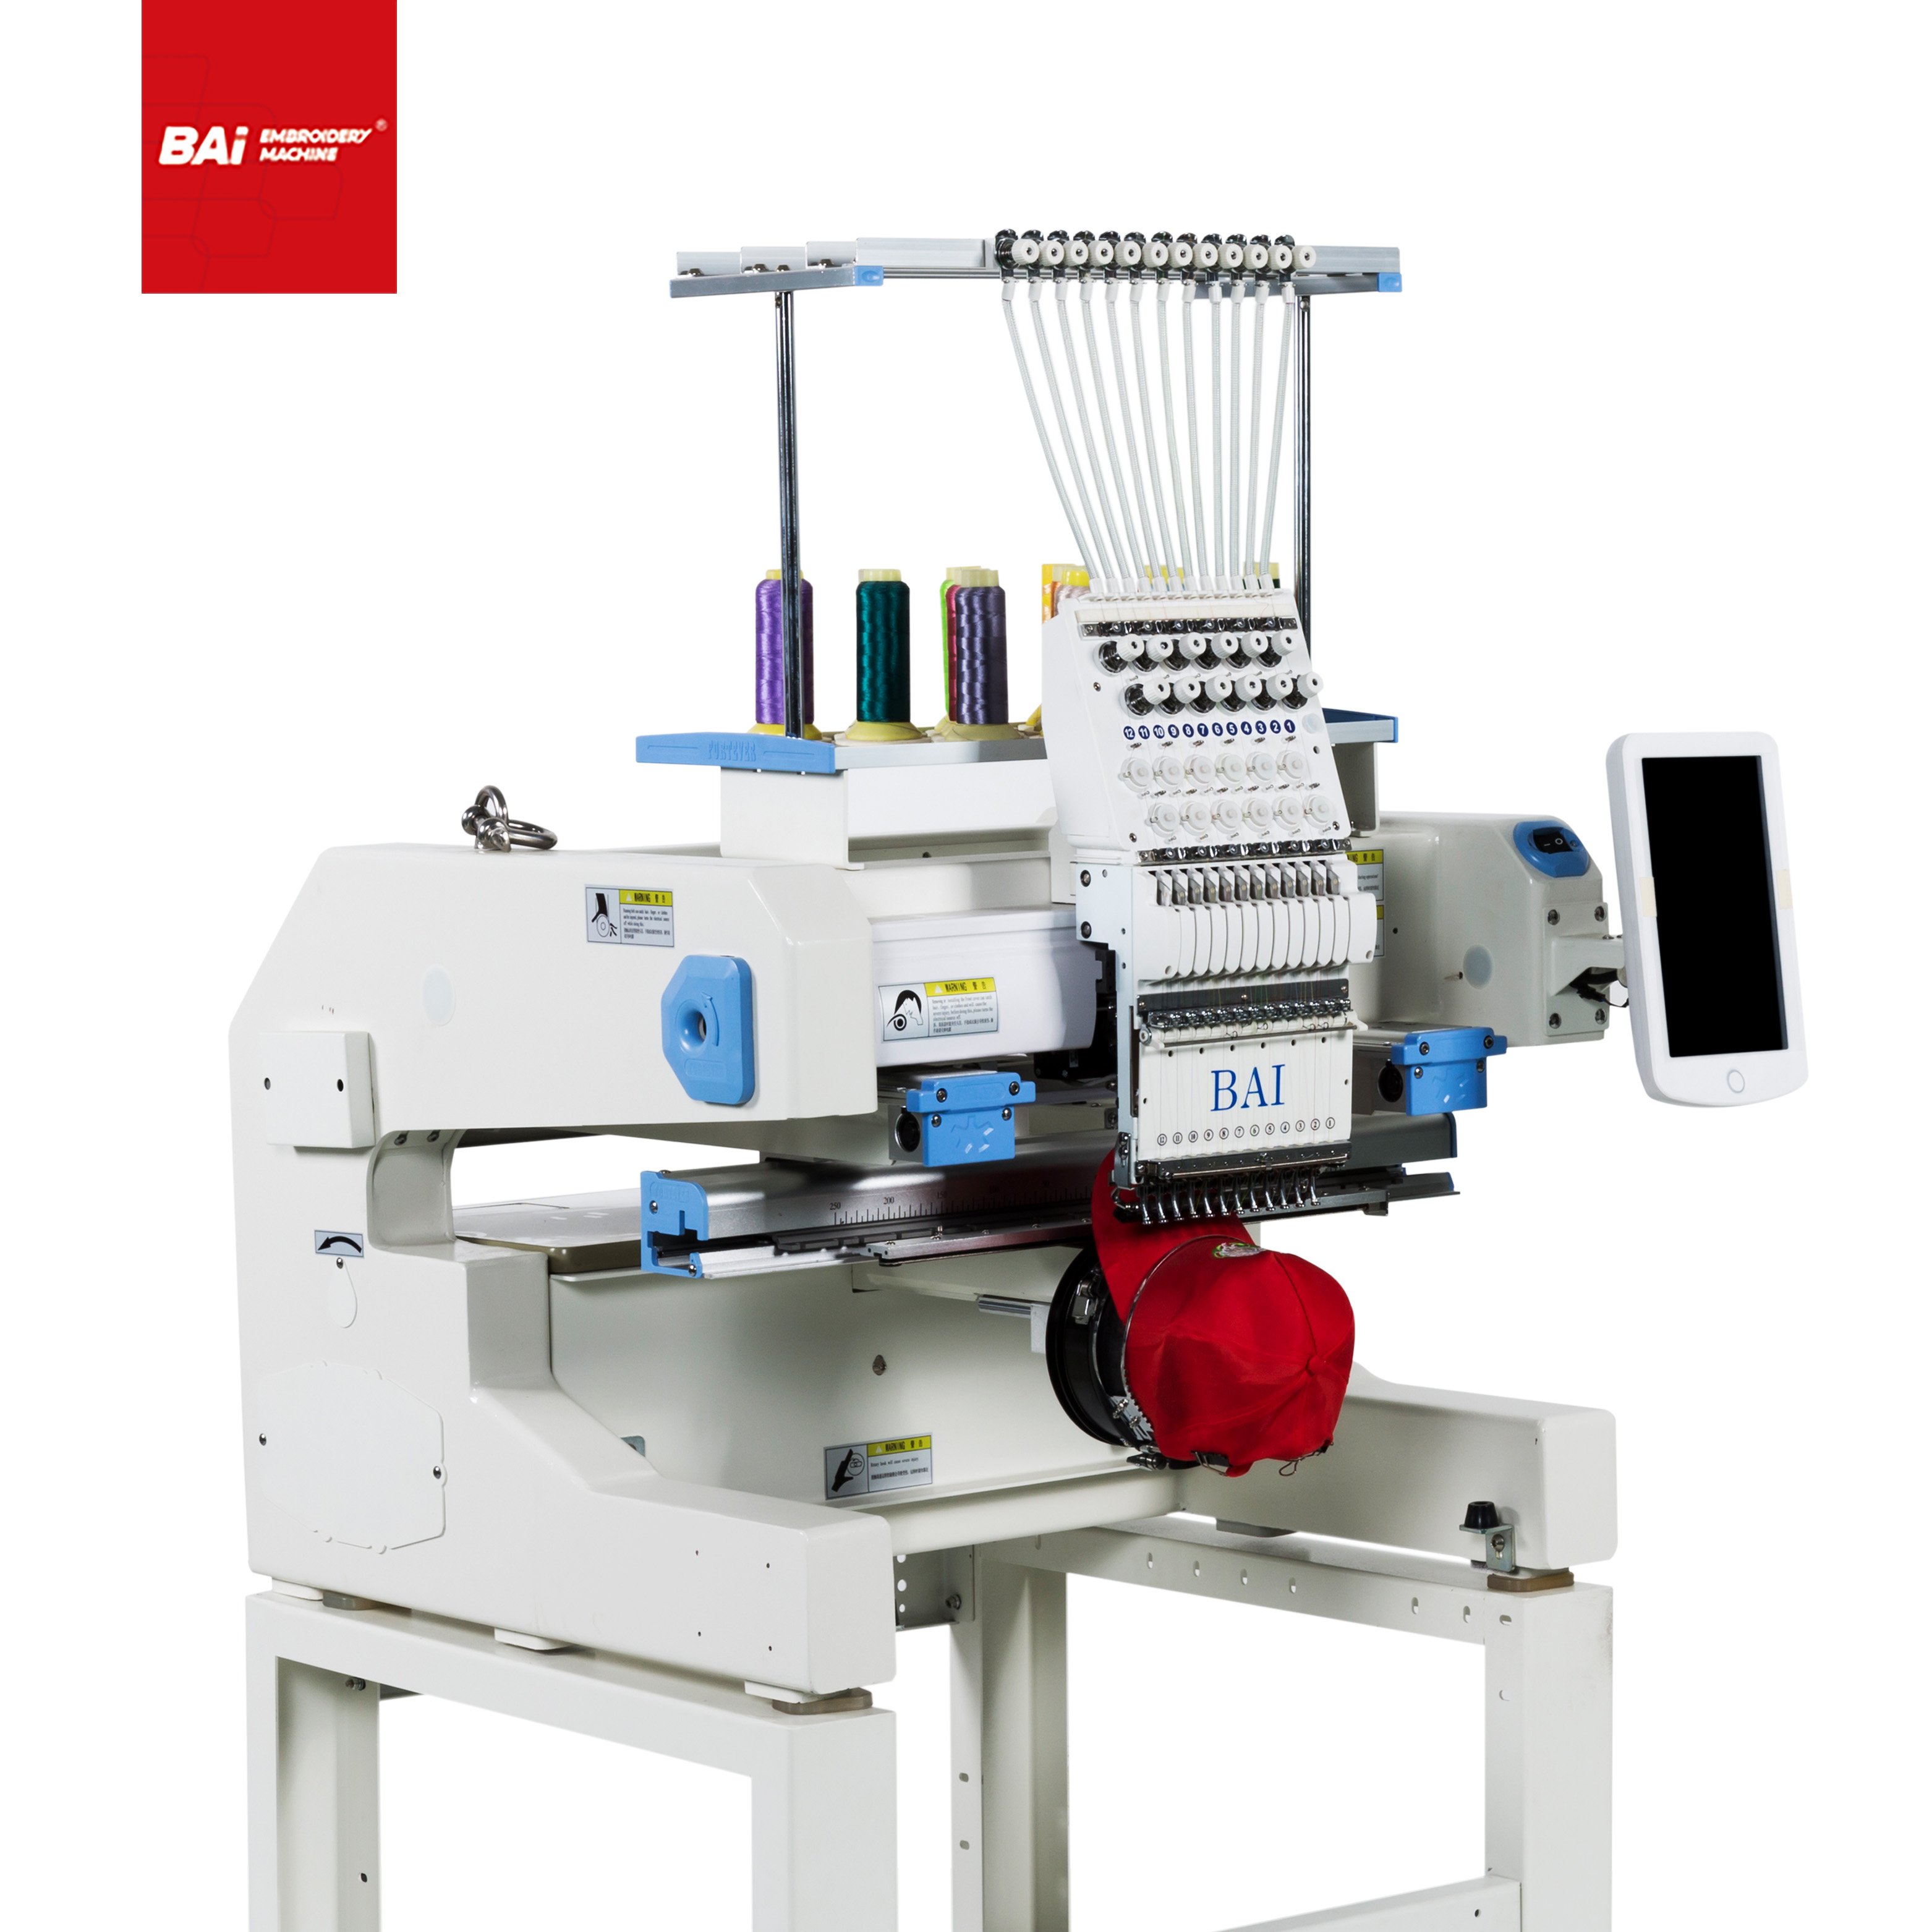 BAI Logo Embroidery Machines for Household with Embroidery Shop